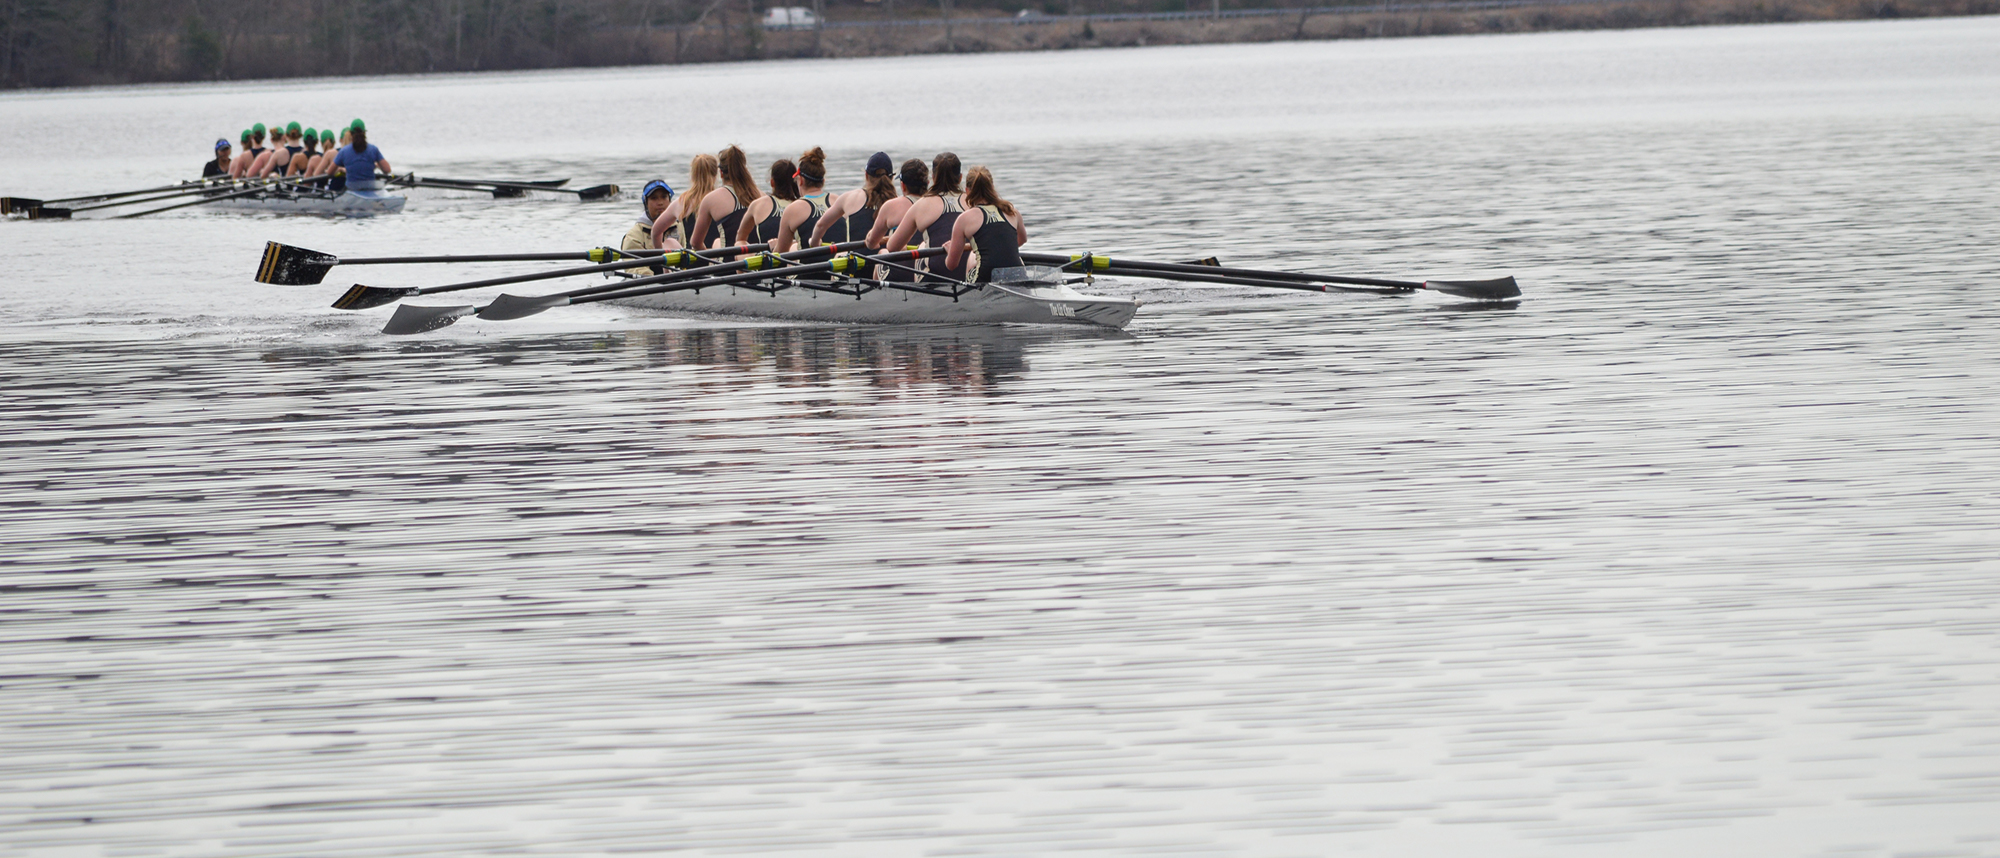 ROWING PARTICIPATES IN FIRST WORMTOWN CHASE REGATTA